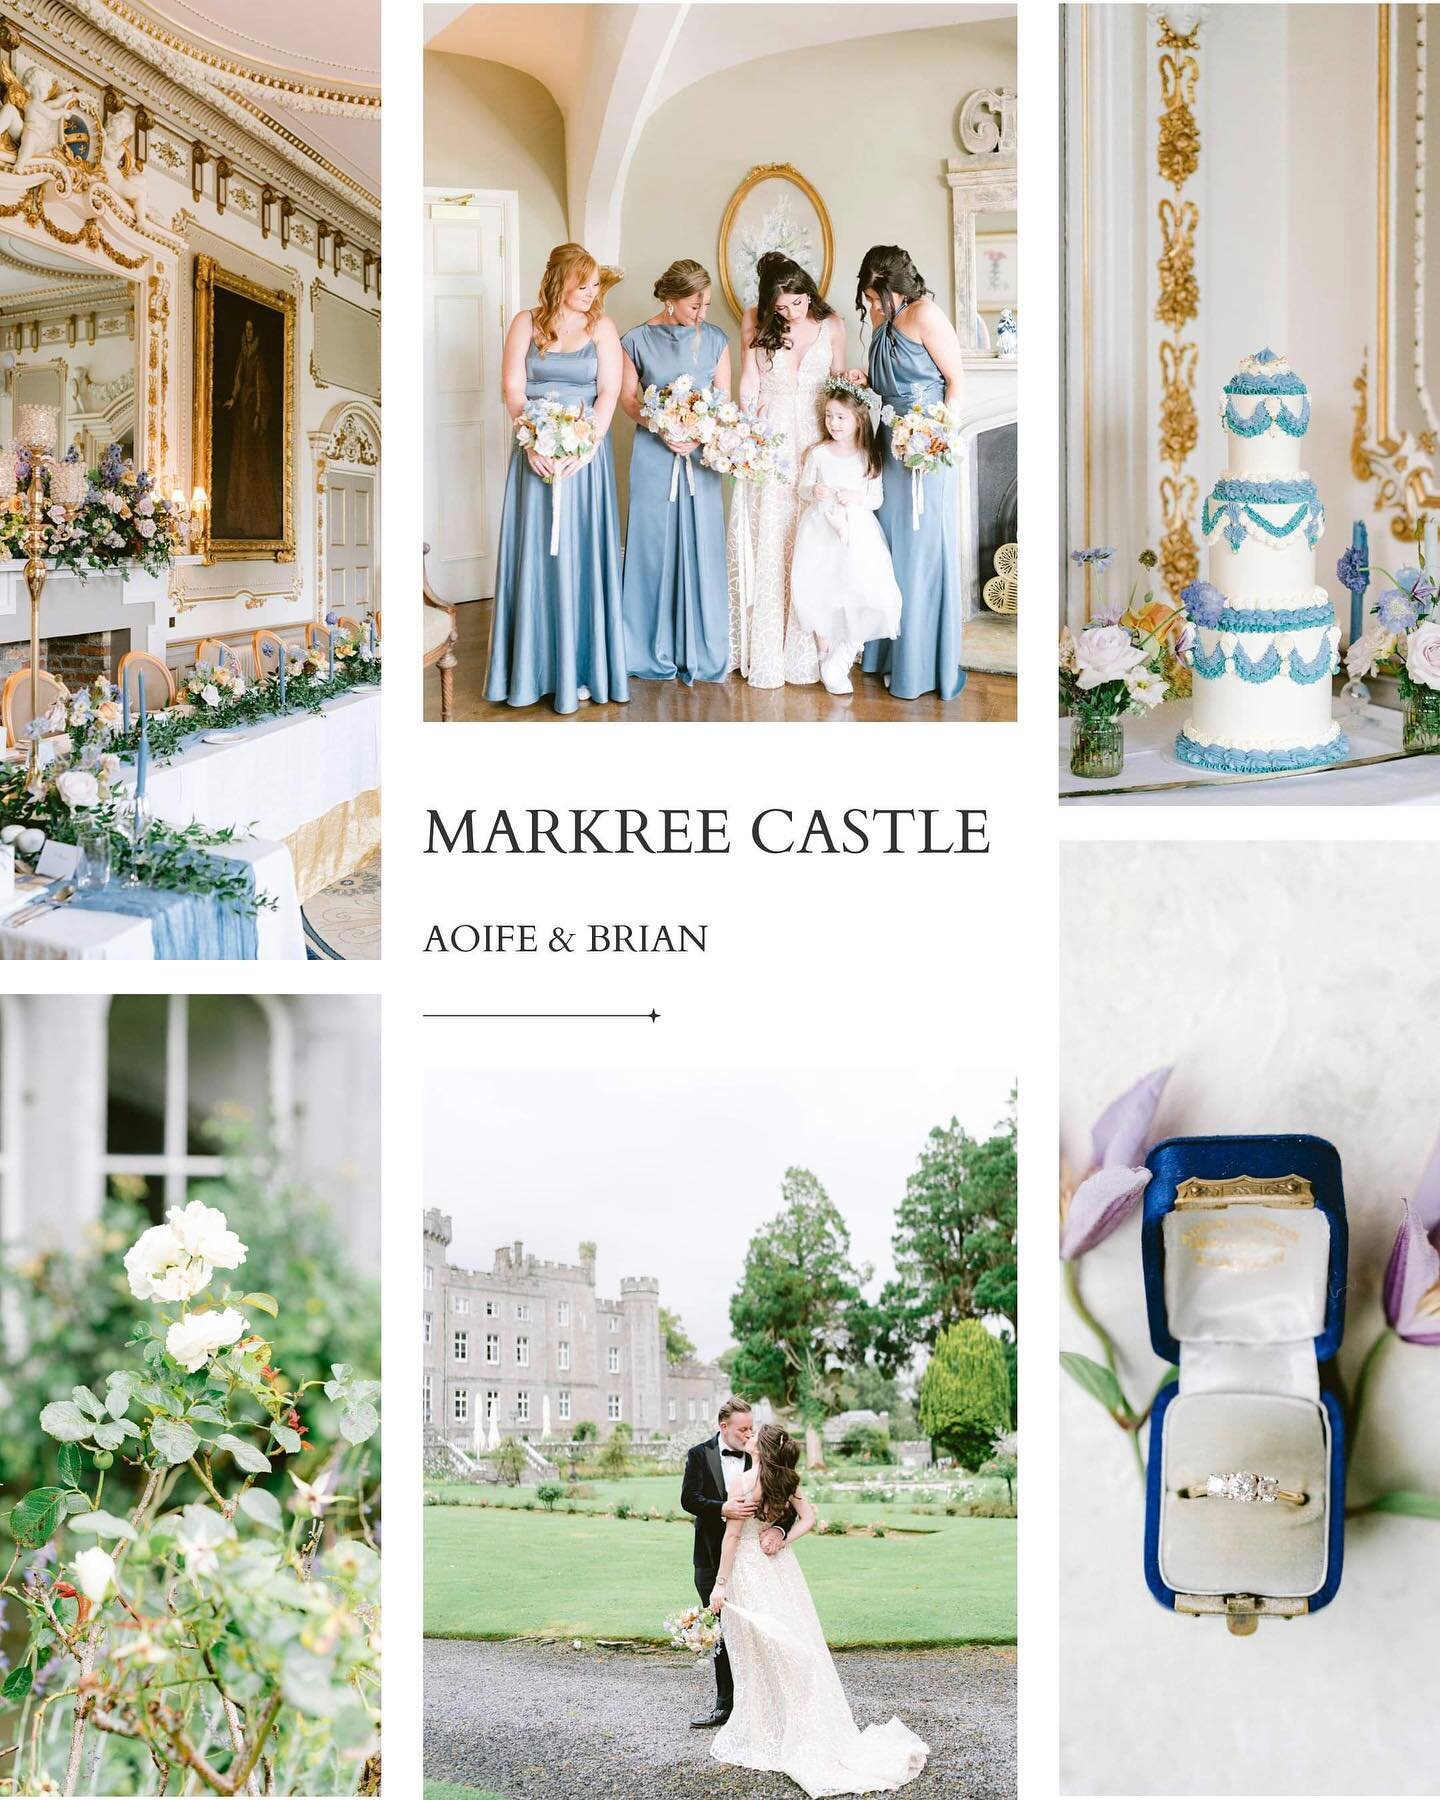 Aoife &amp; Brian got married at the magical Markree Castle, Co. Sligo and we were all treated to a wedding that will be remembered for a lifetime✨ 

The whole day took place at the castle, which meant guests could enjoy the beautiful grounds and rel